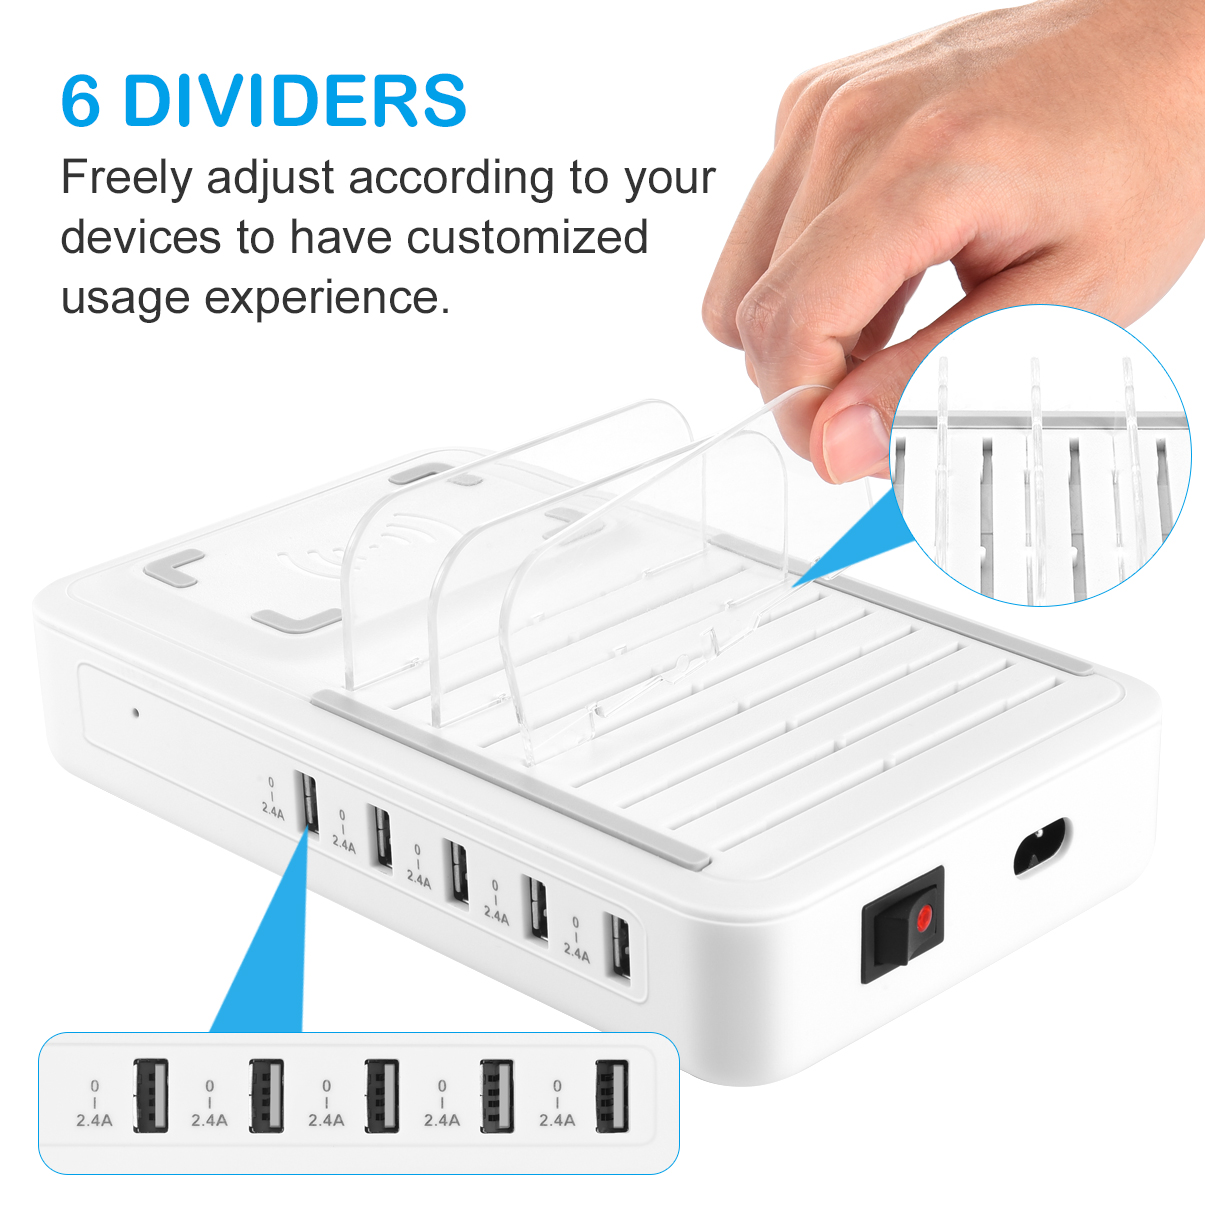 Wireless Charging Charging Station Dock & Organizer 5-Port USB Charging Station Dock Desktop with 1 Wireless Charging Pad 40W for Smartphones, Tablets & Other Gadgets - White - image 5 of 10